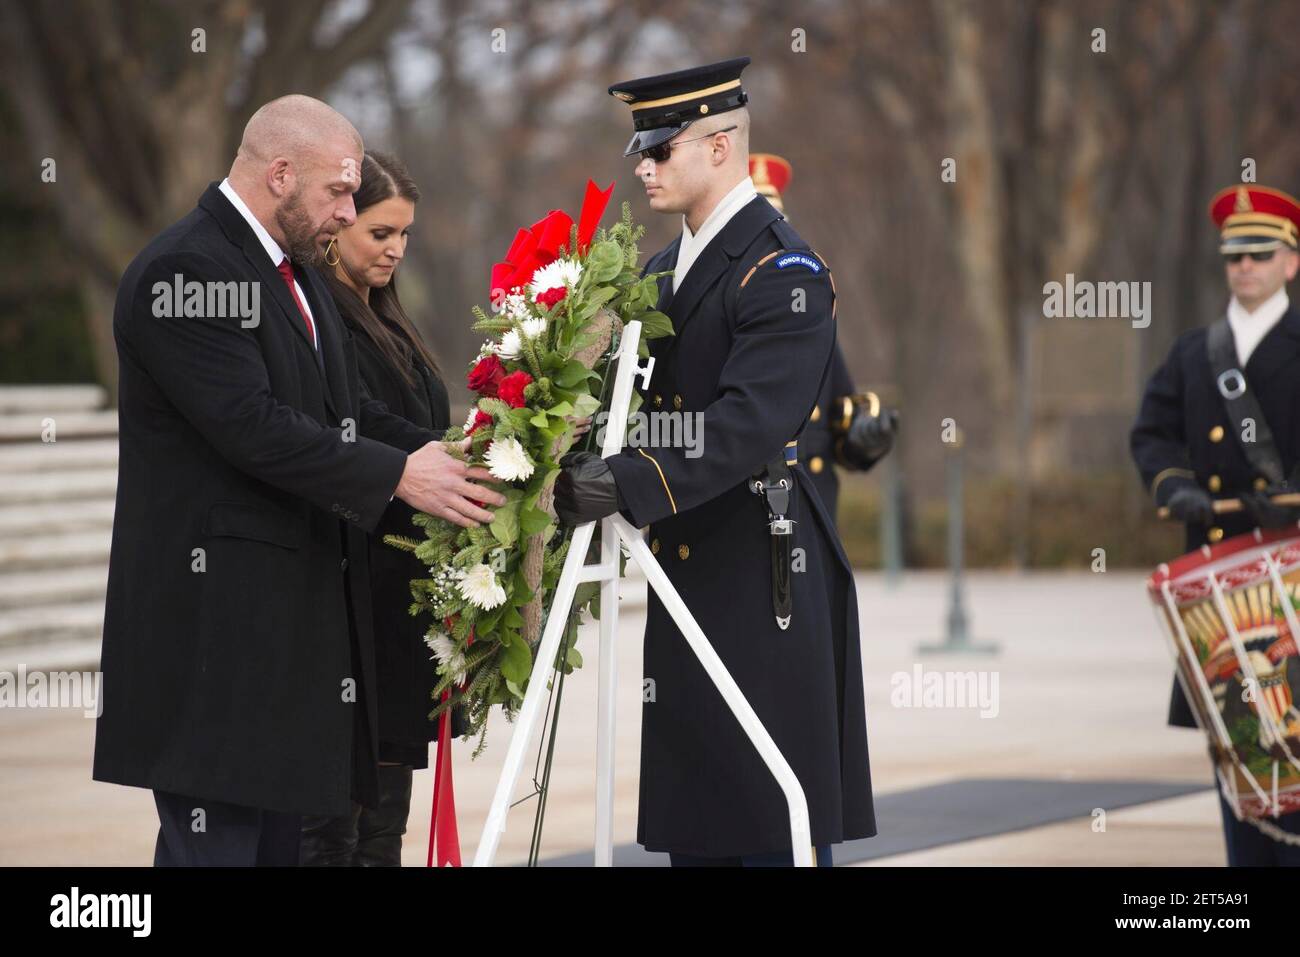 Paul “Triple H” Levesque and WWE Chief Brand Officer Stephanie McMahon place a wreath at the Tomb of the Unknown Soldier in Arlington National Cemetery (30813214823). Stock Photo